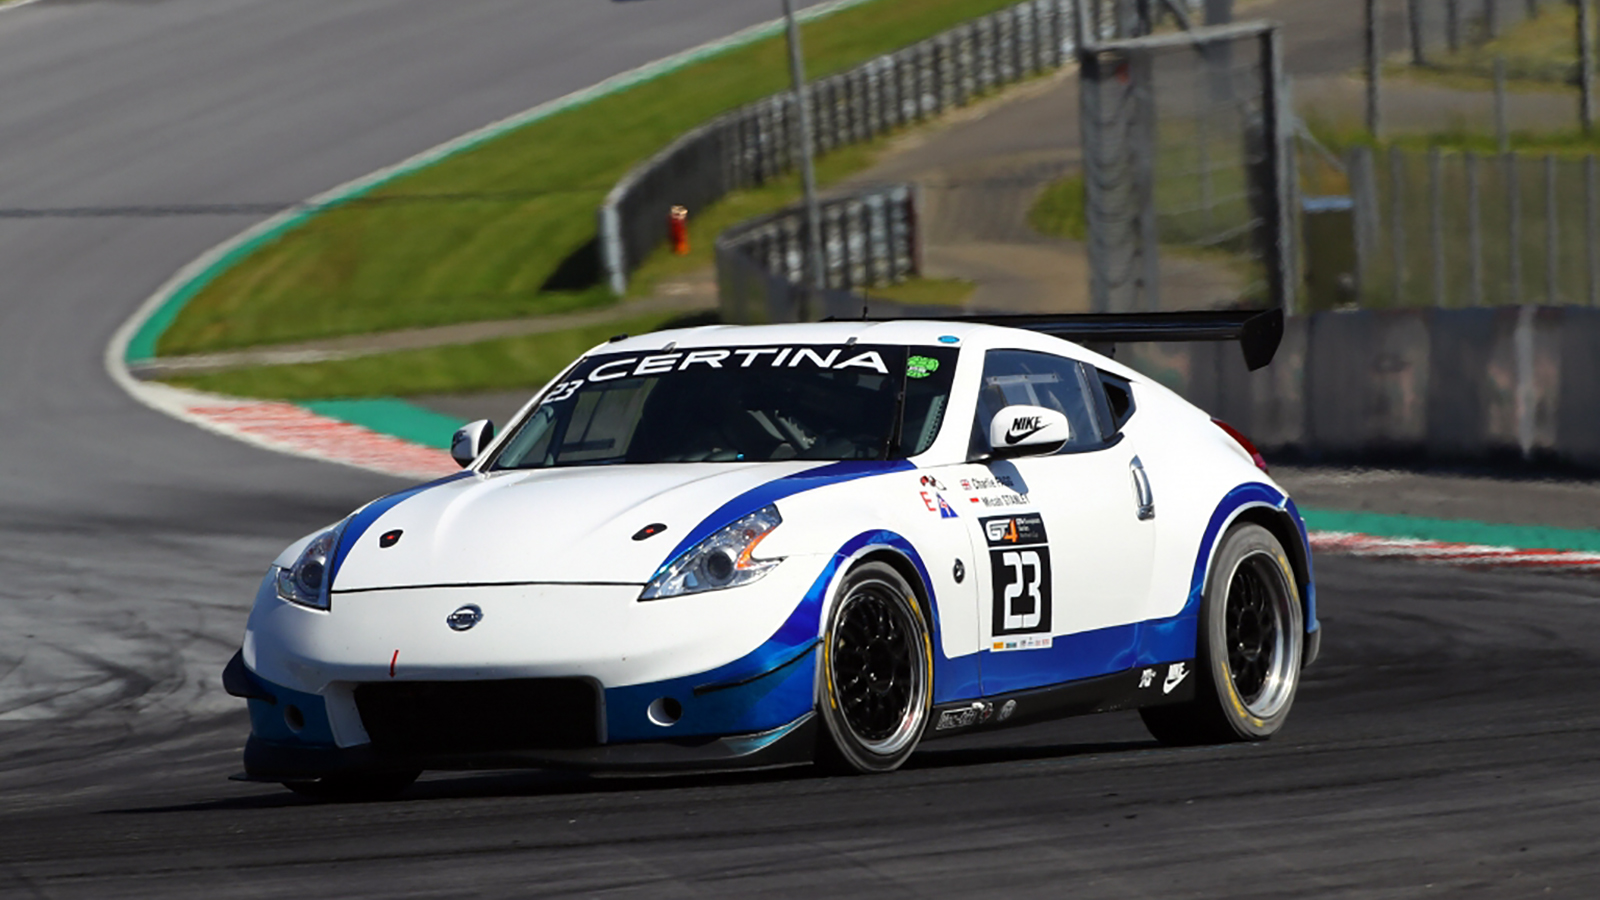 Professional performance from Charlie Fagg on first visit to Red Bull Ring.